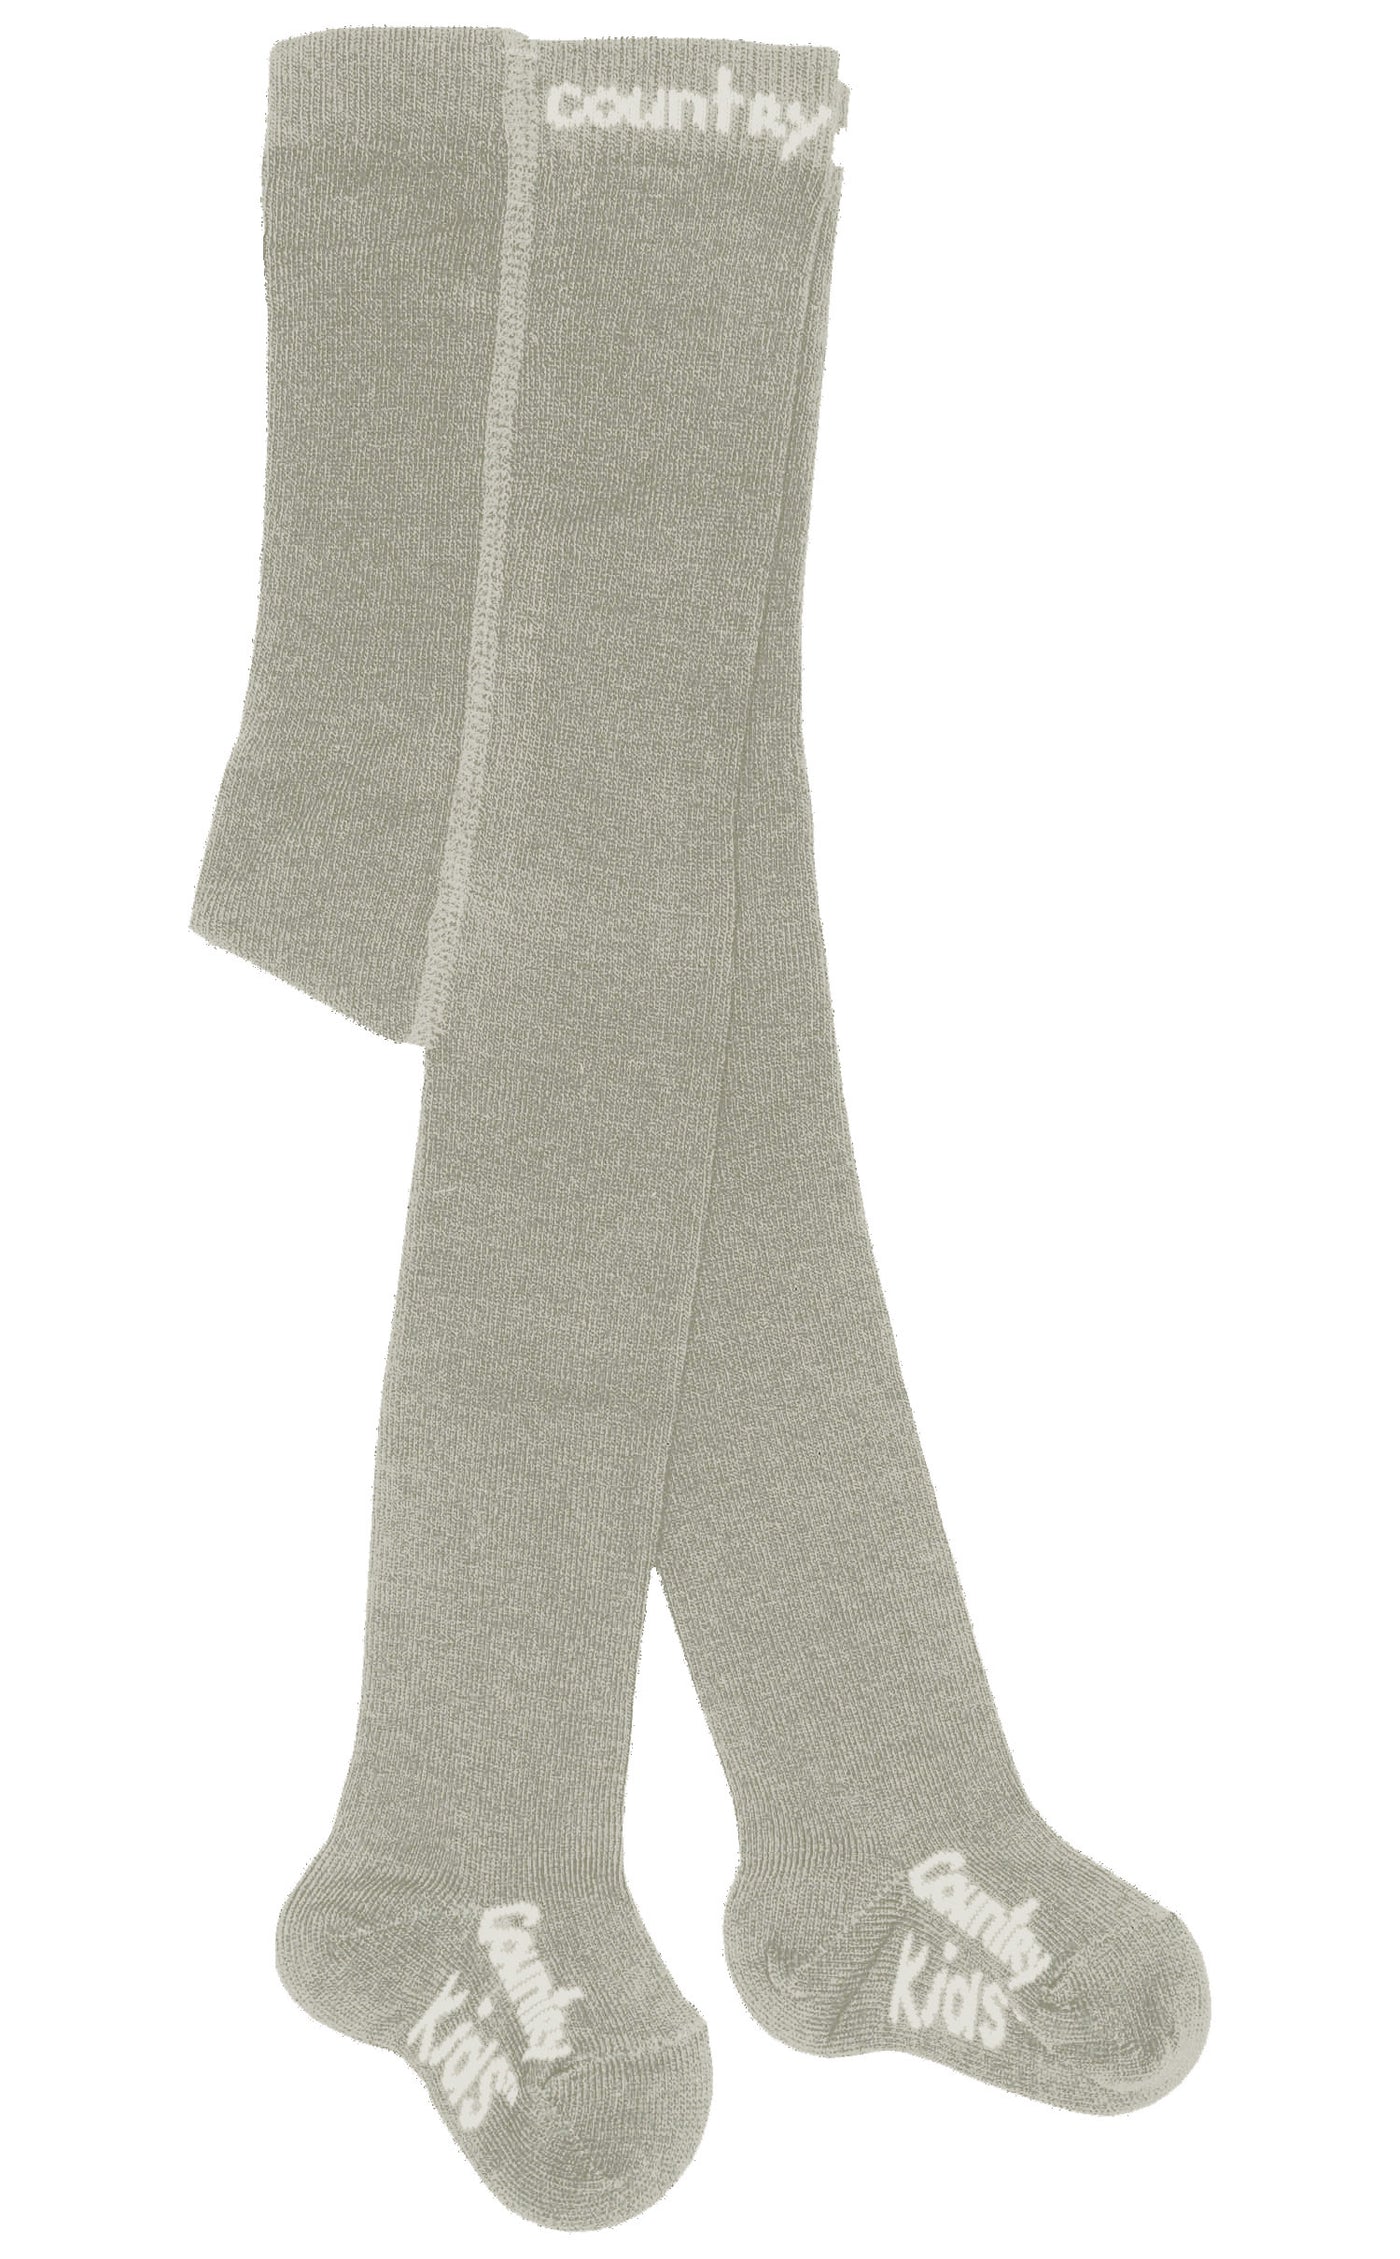 country kids tights grey